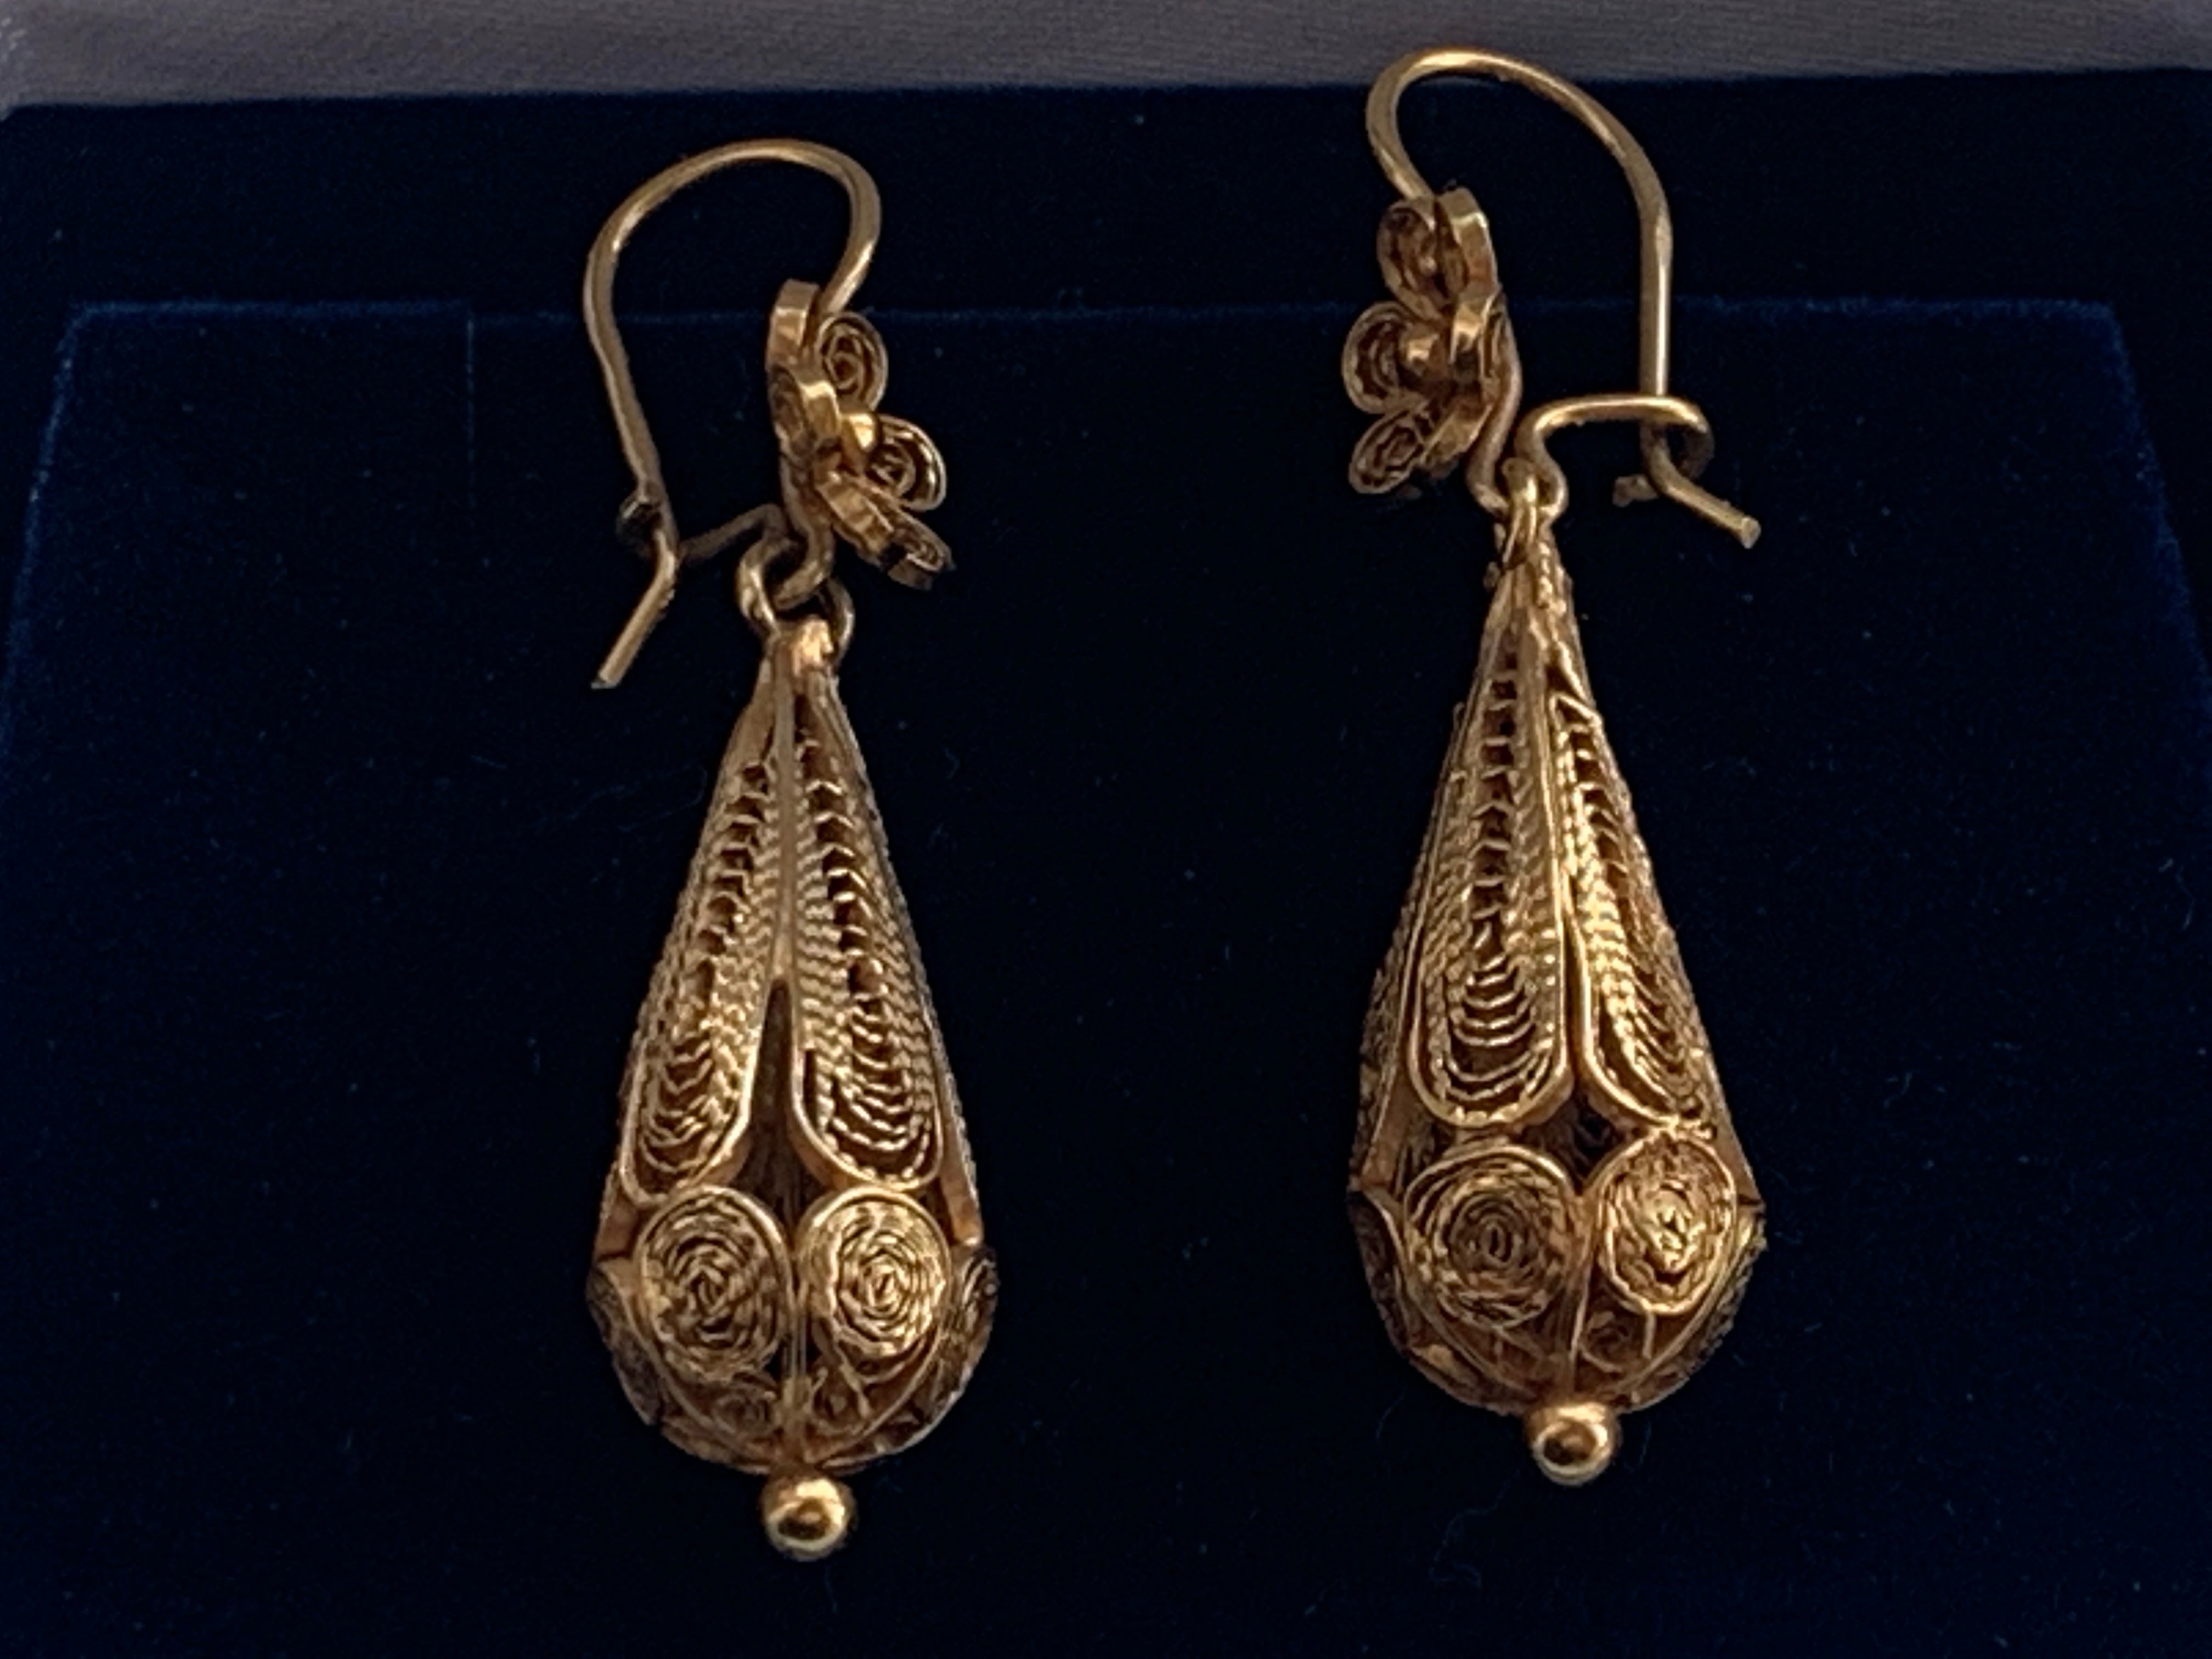 Beautifully Crafted 9ct Gold Portuguese Filigree Bomb drop earrings
These are Very Sturdy and Strong- not flimsy
Hallmarked on the hooks
Era Early 20th Century
Stamped with a crown mark , 375 
 

